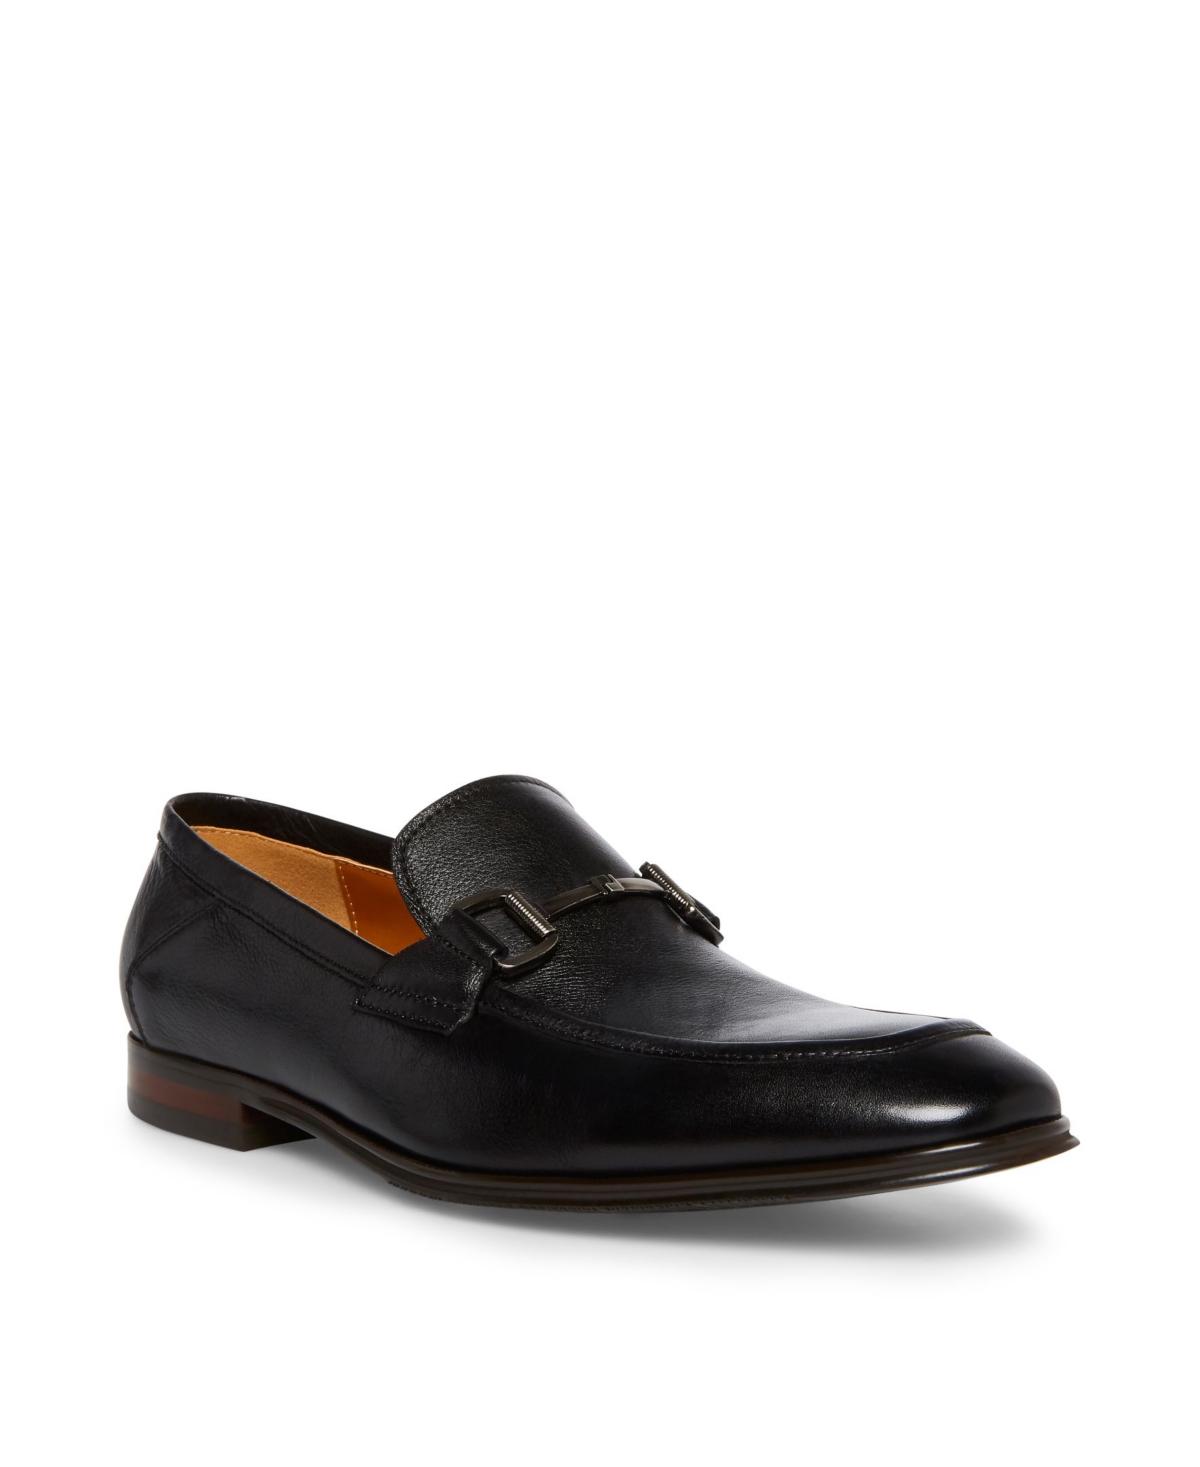 Men's Aahron Loafer Shoes - Black Leather